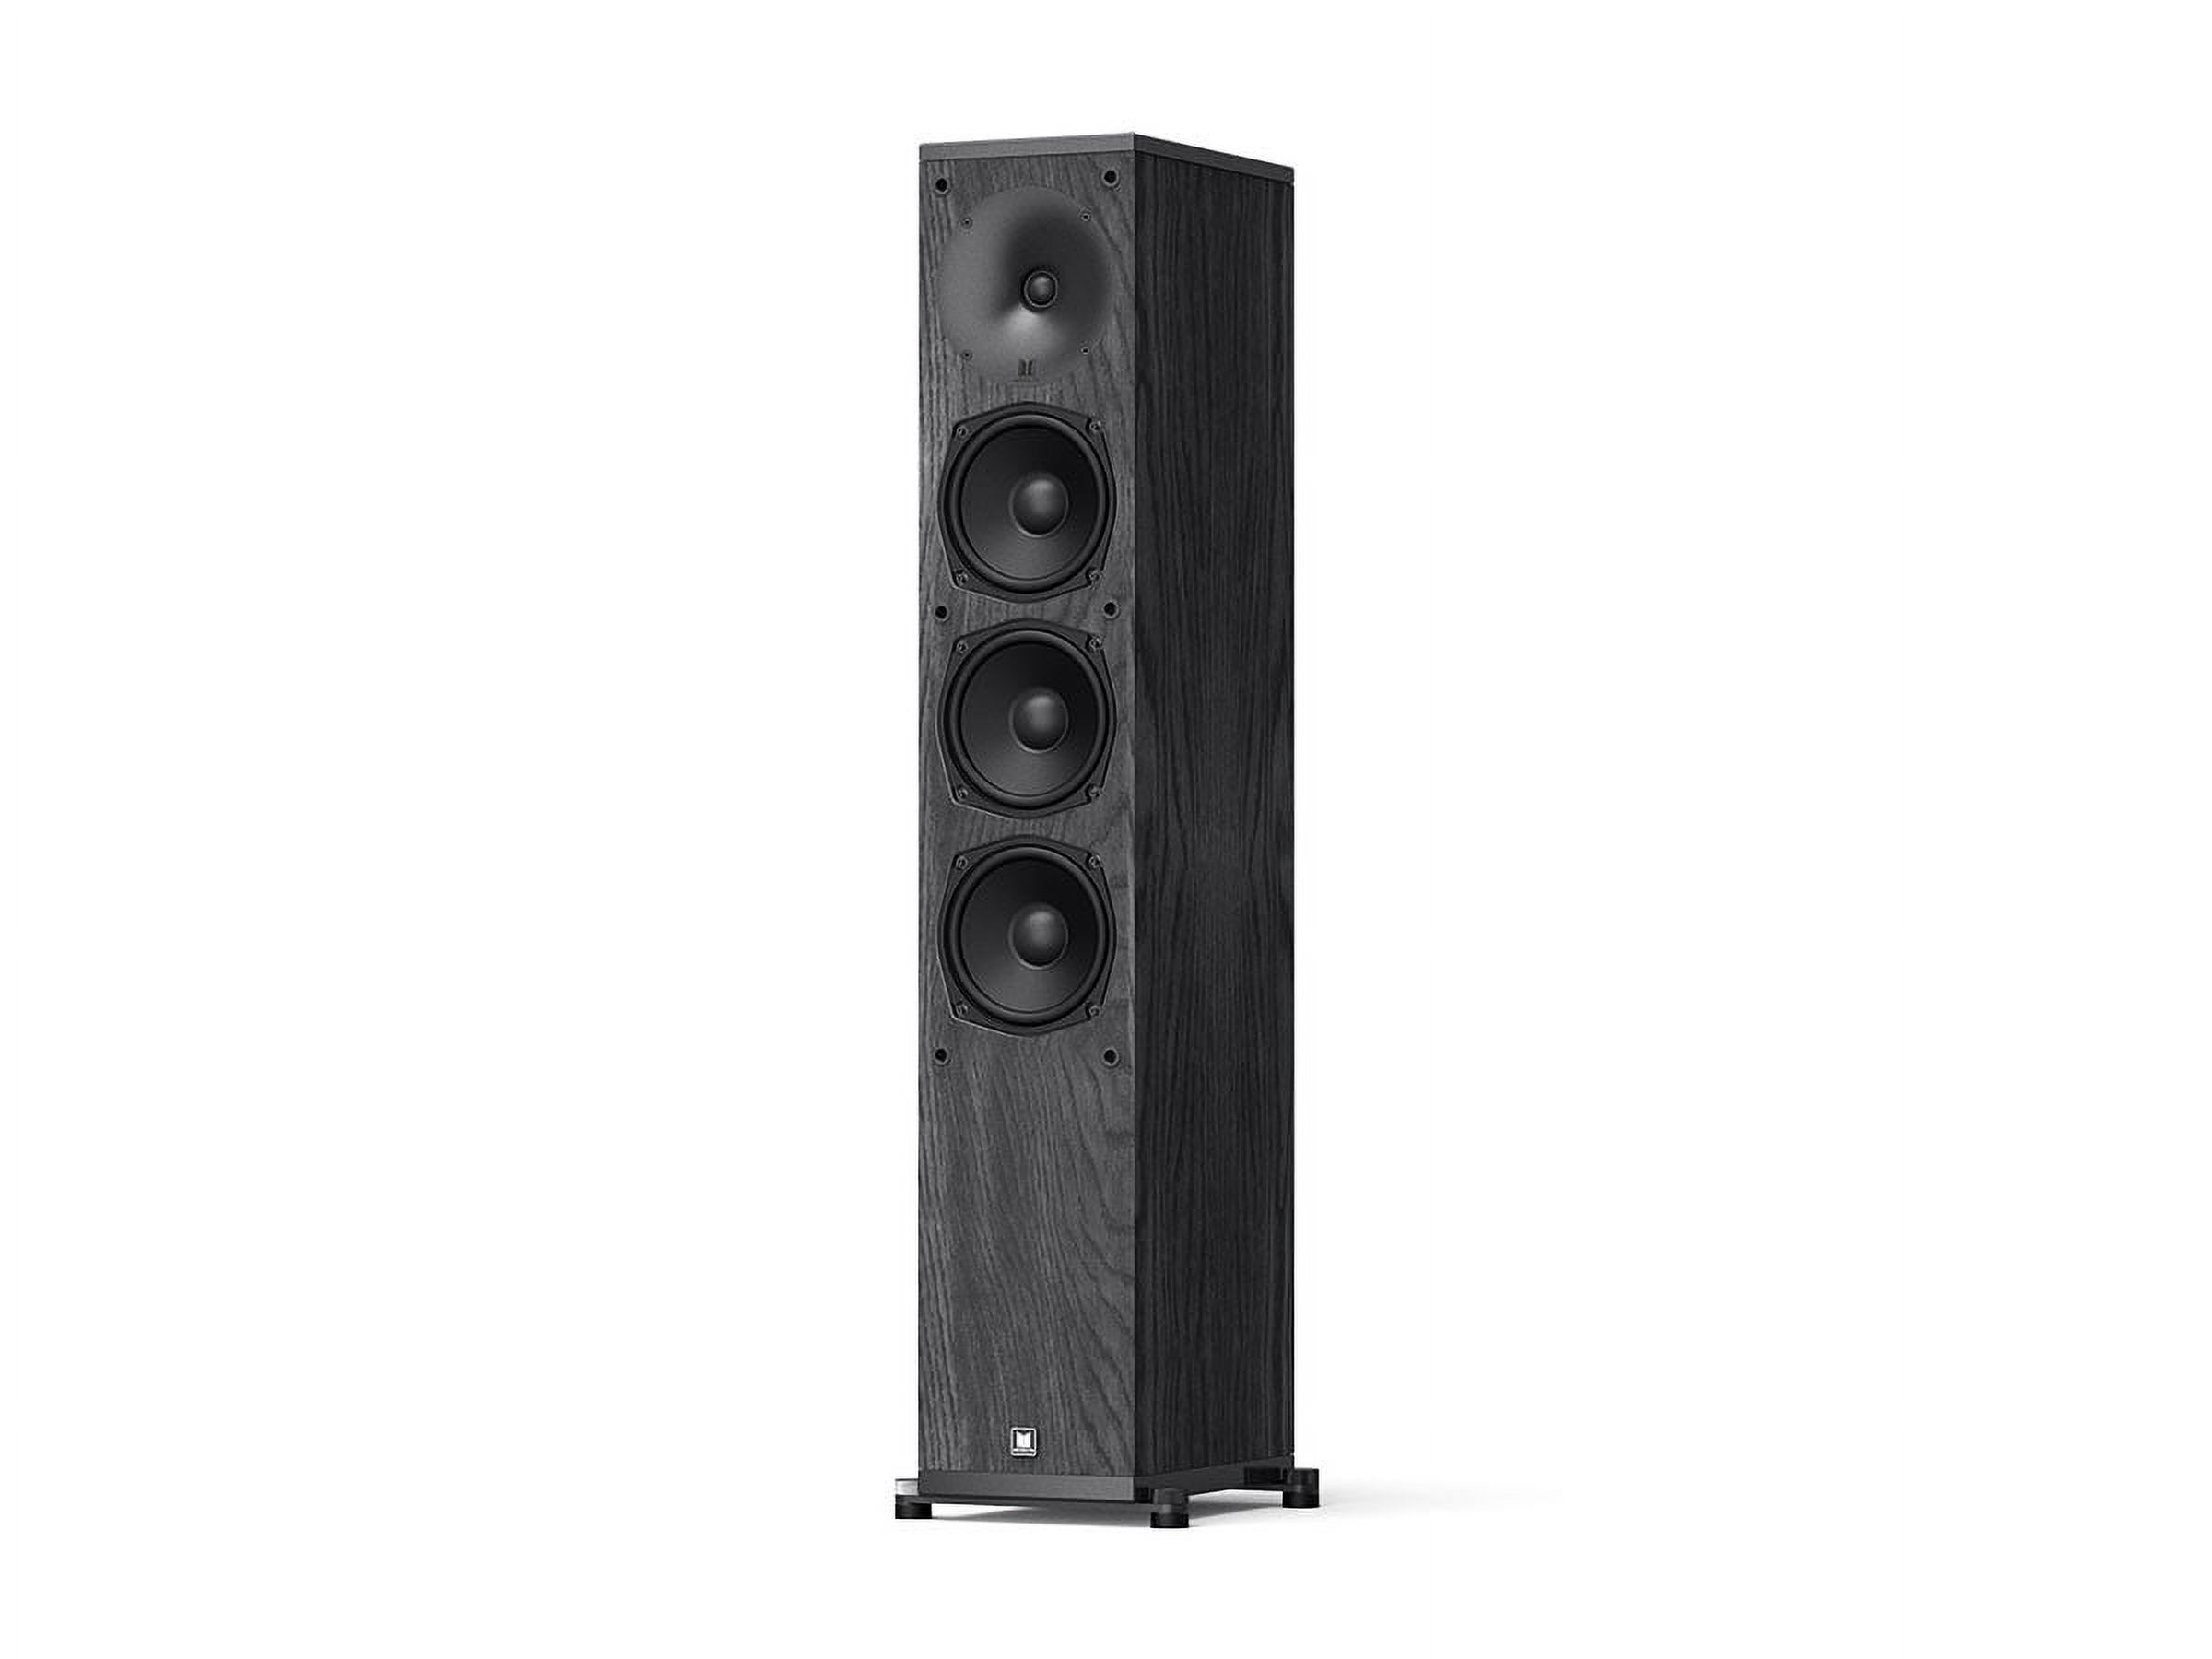 Monoprice Monolith Encore T5 Tower Speaker, High Performance Audio, 5.25 inch Main and Mid Woofers, MDF Cabinet With Internal Bracing, For Home Theater System - image 1 of 6